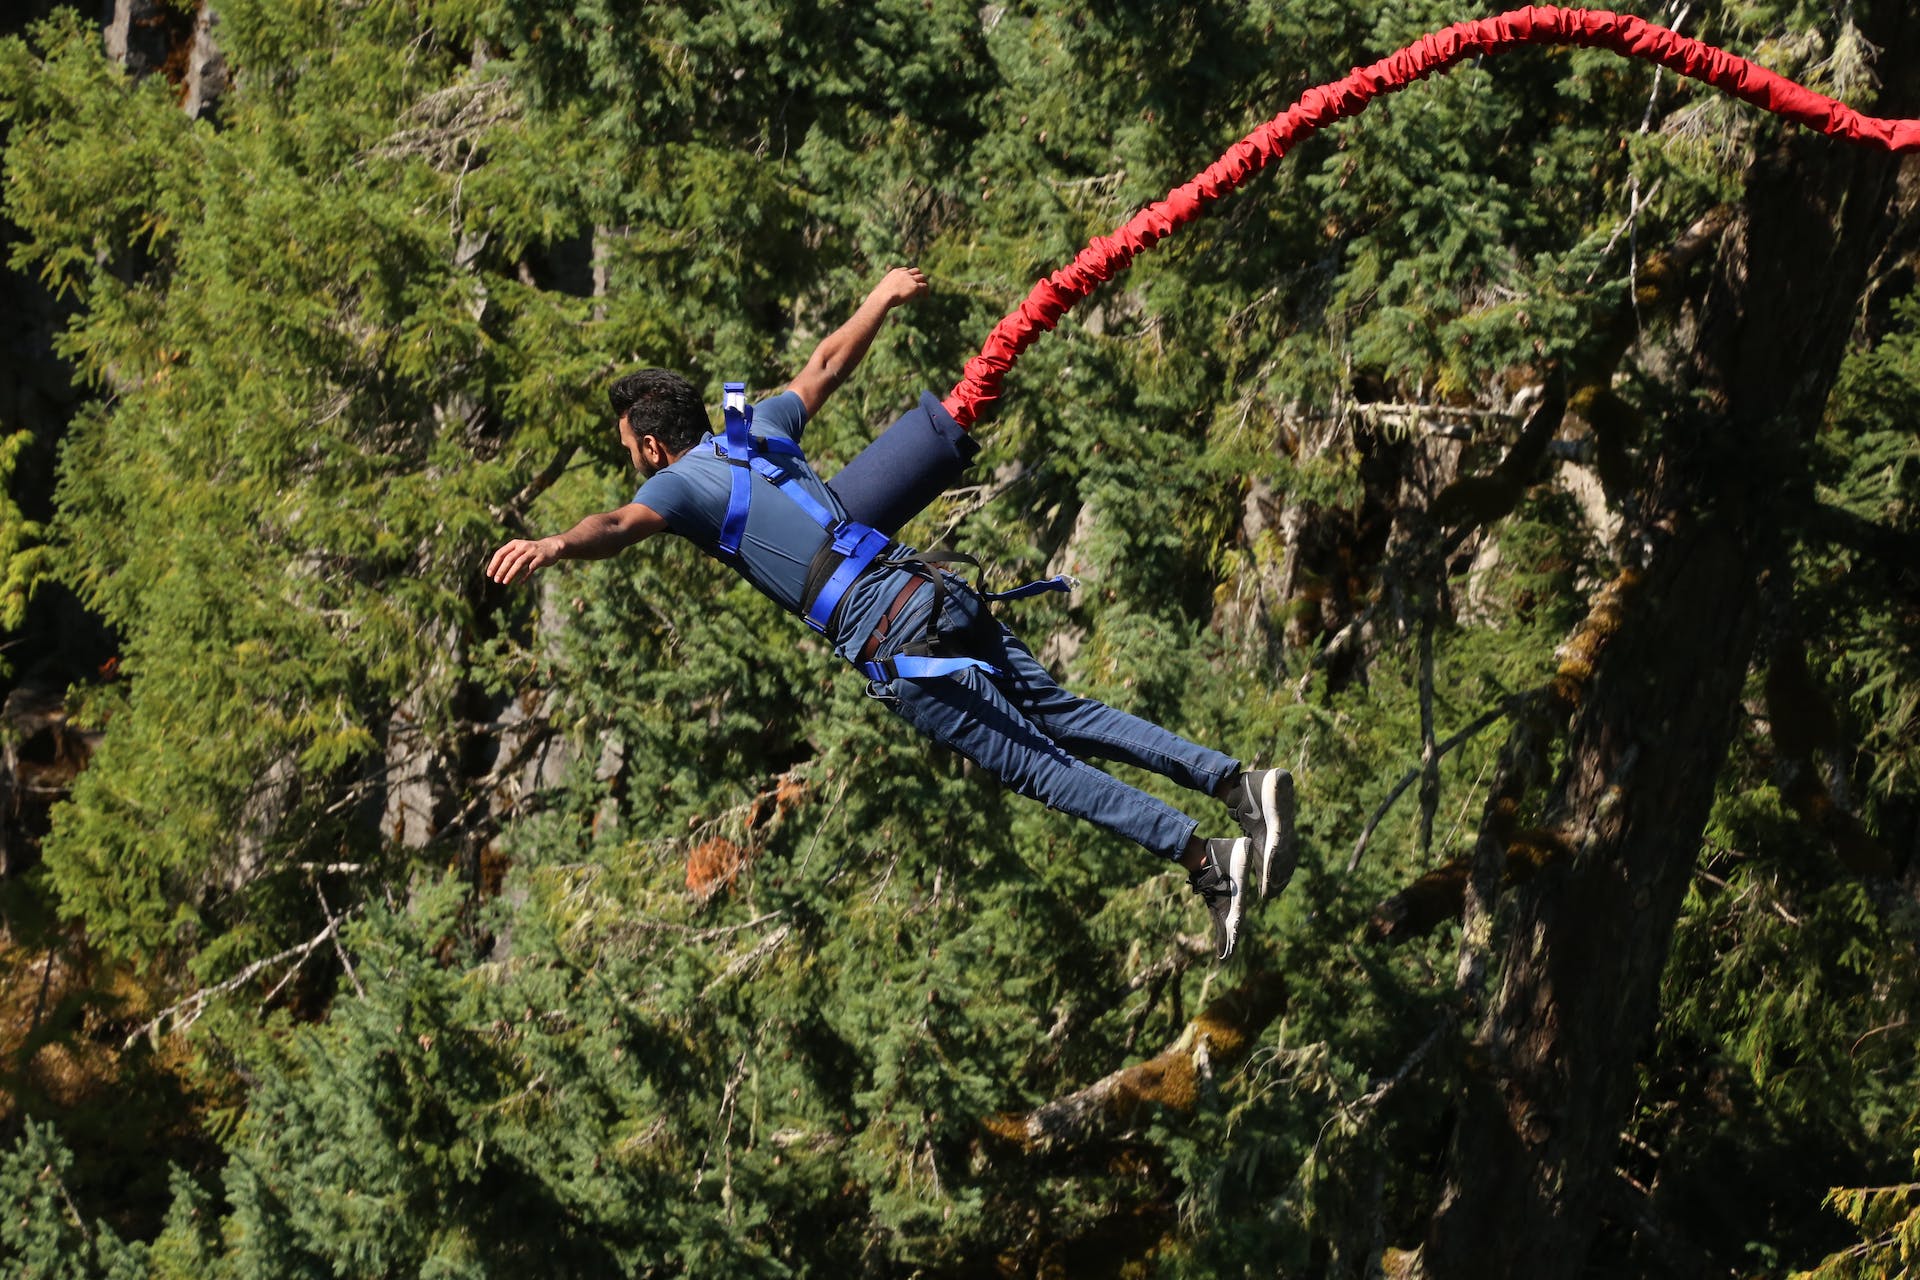 Daring Leap into the Abyss: A Man's Bungee Jumping Adventure